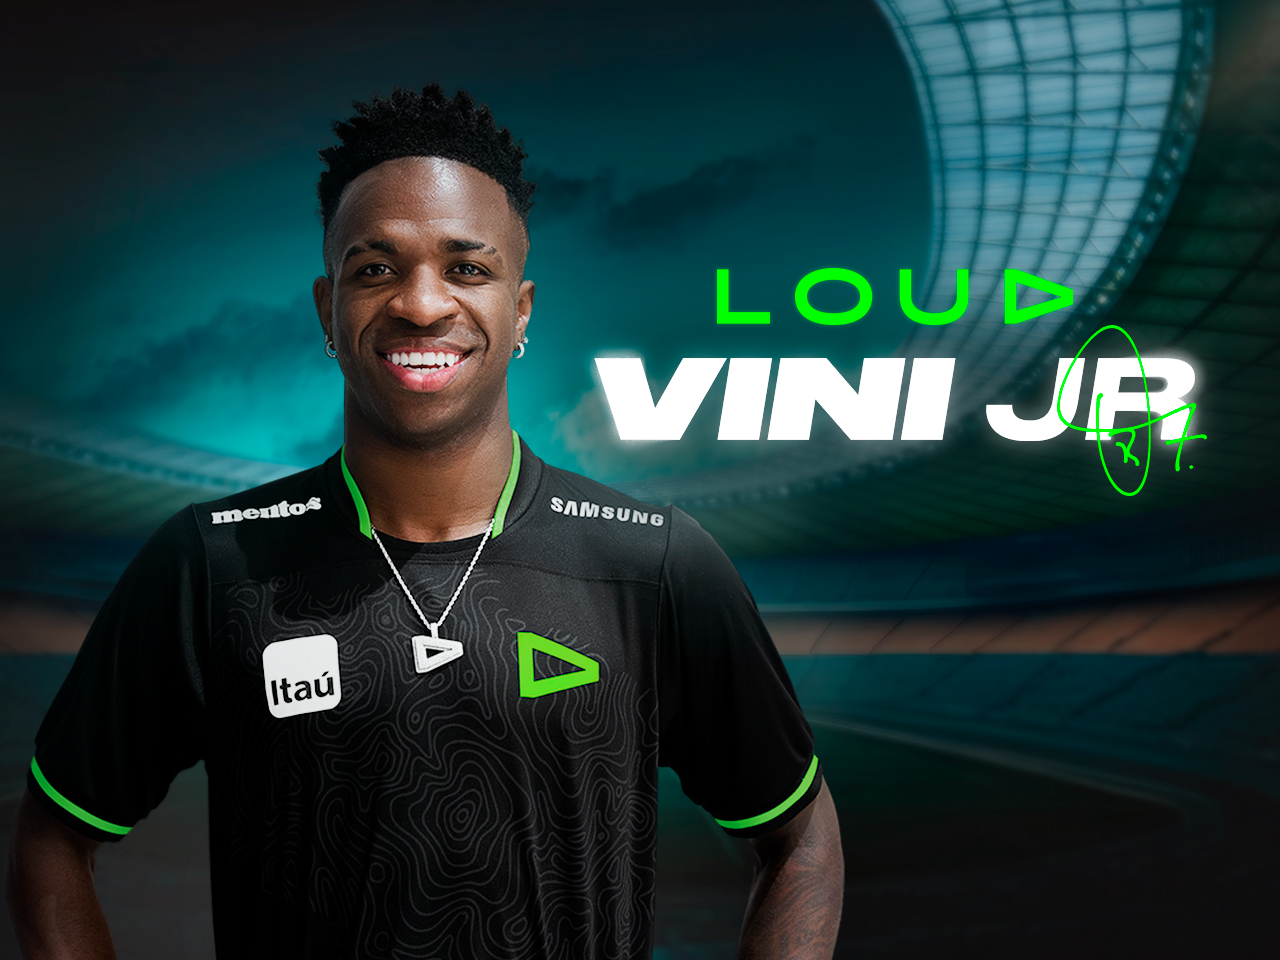 Real Madrid's Vini Jr. joins LOUD as a co-owner